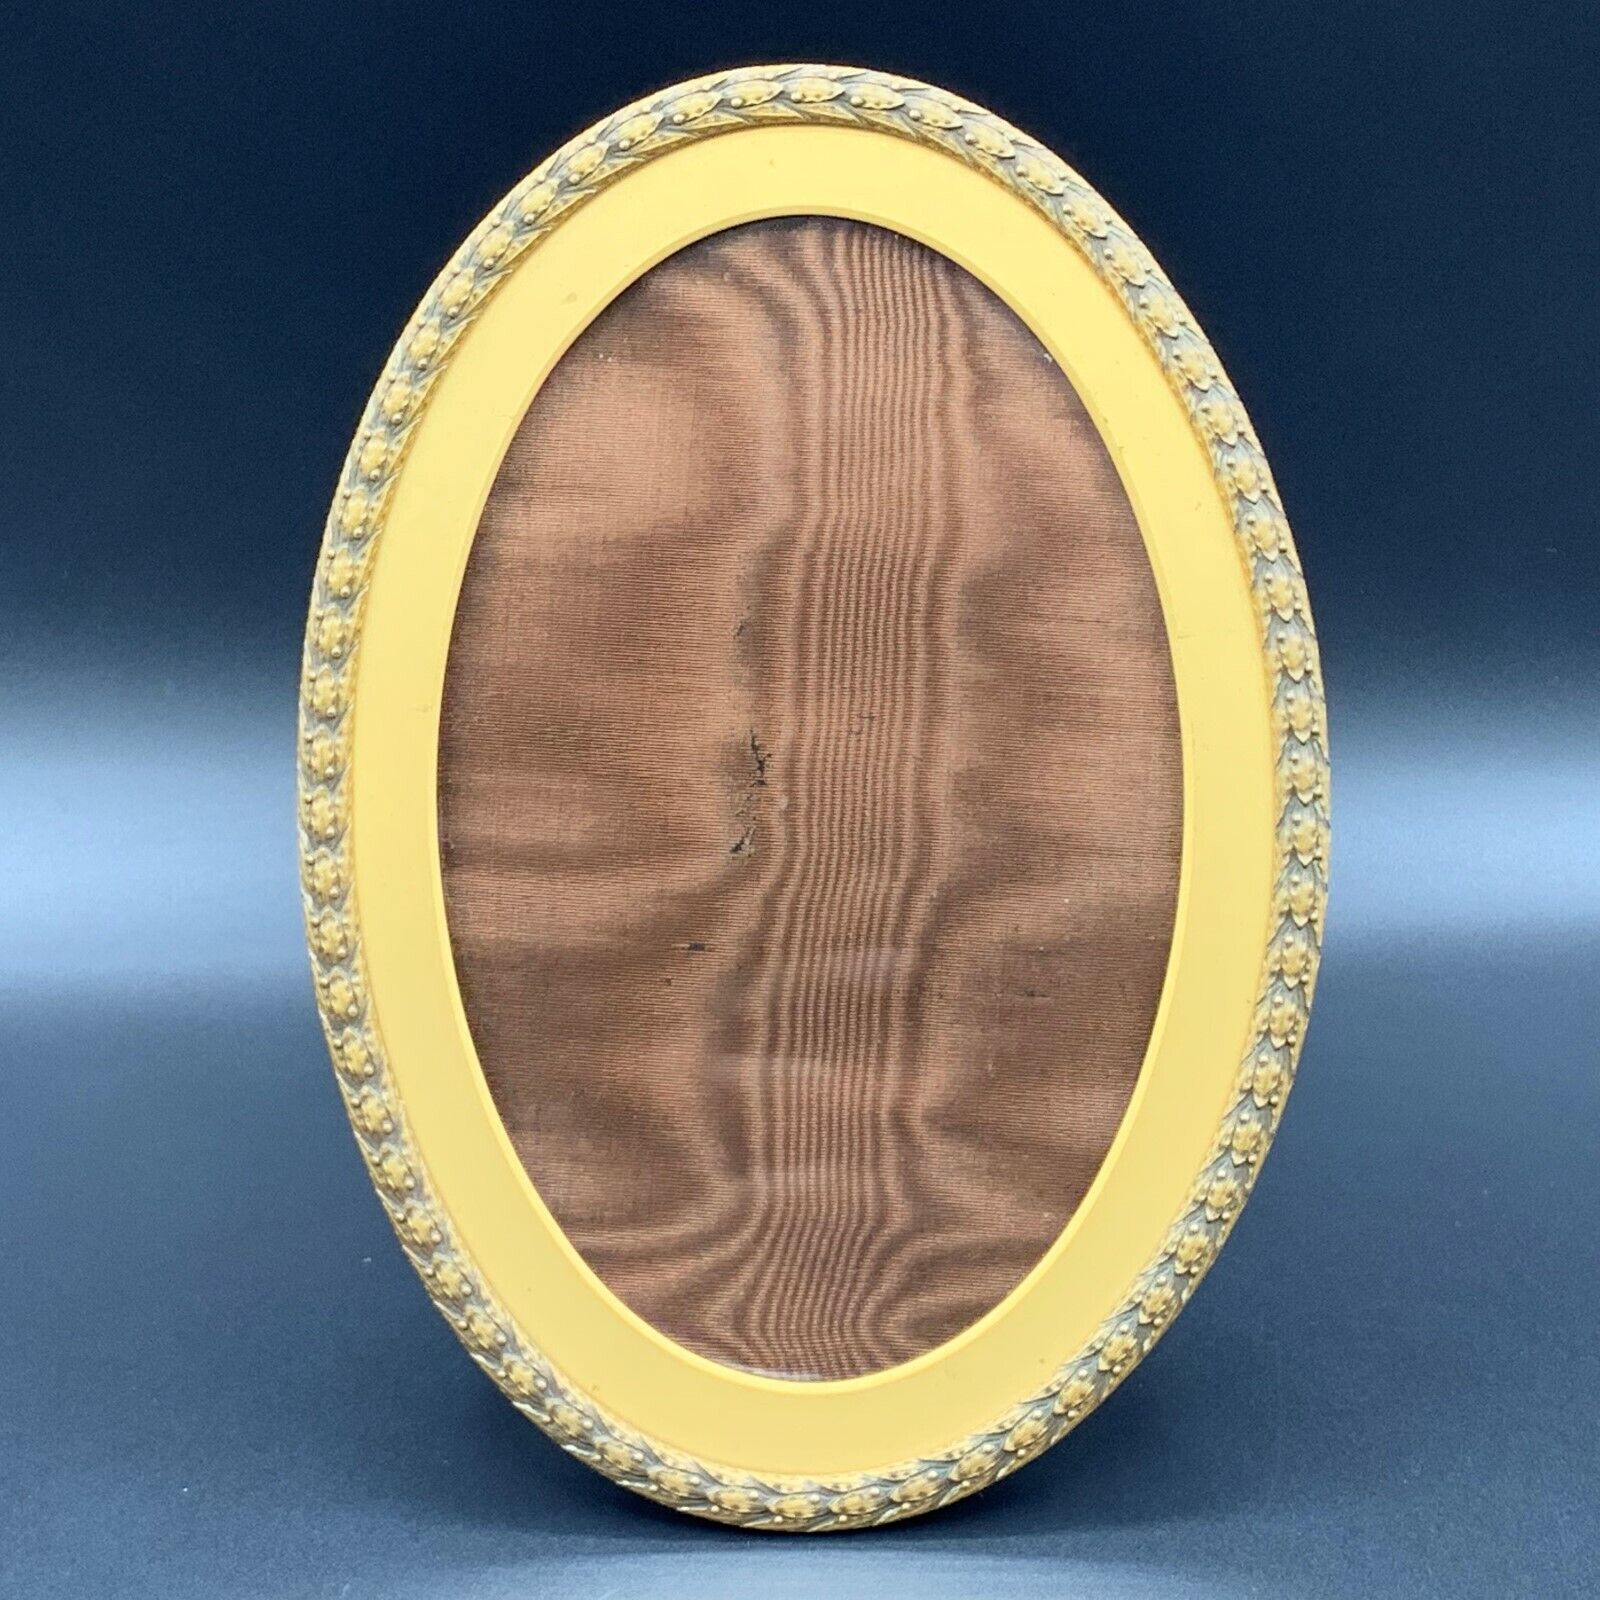 J.C. VICKERY c1900's Antique Ornate Gilt Bronze Oval Photo Picture Frame W/Easel